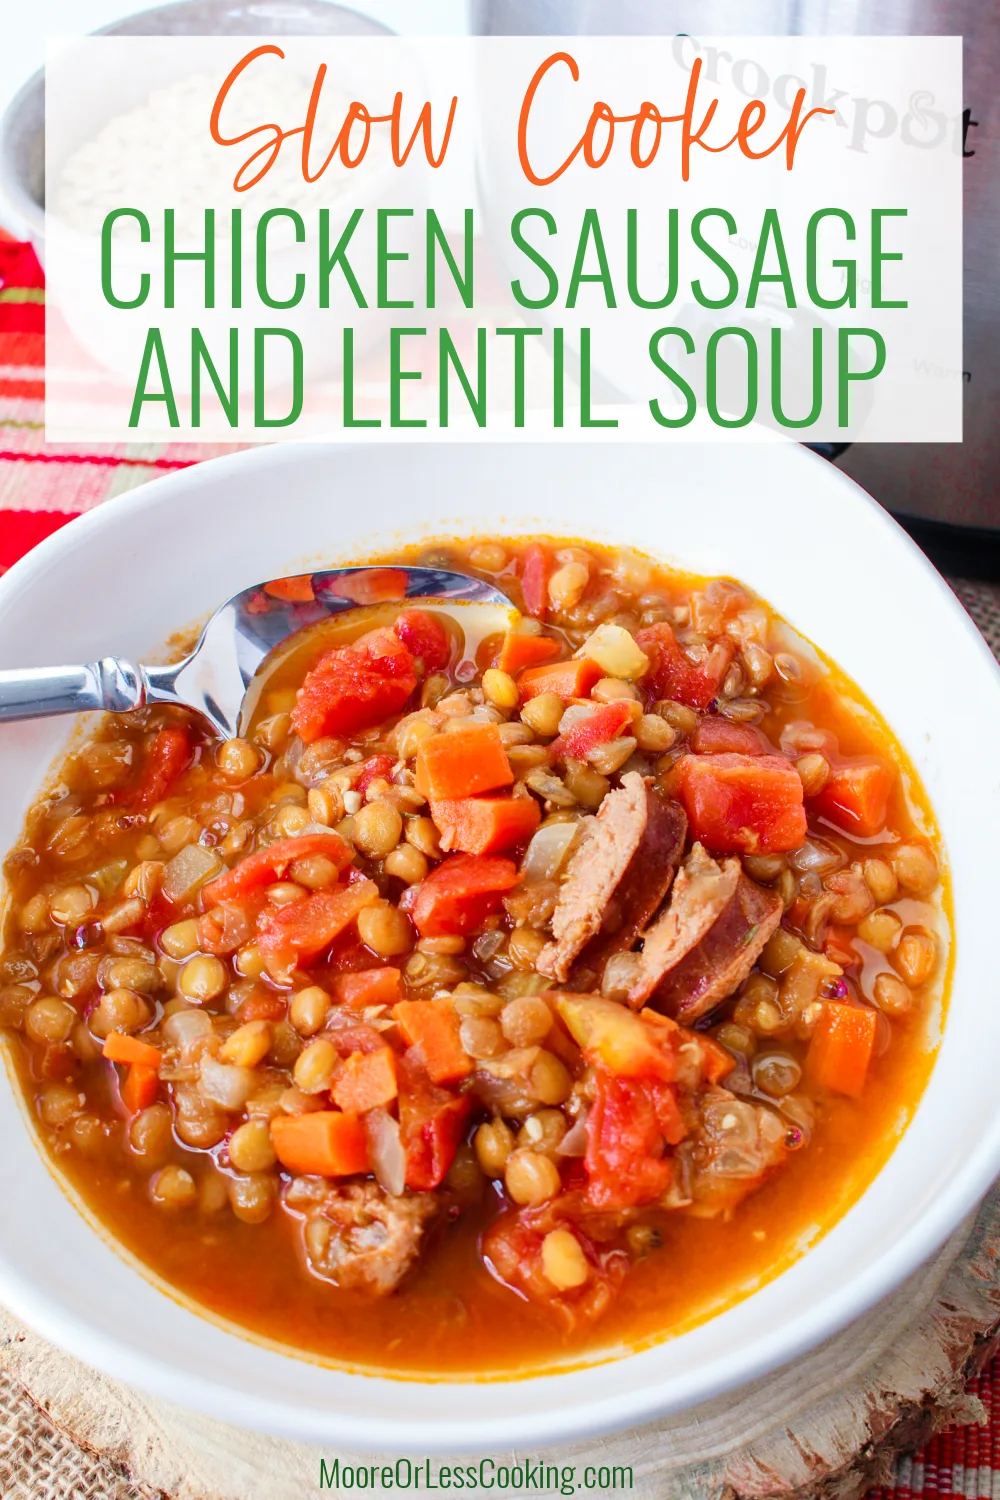 Perfect for chilly weather, this easy Slow Cooker Chicken Sausage And Lentil Soup is a low-effort meal that's hearty and packed with flavor. It's a set-it-and-forget-it recipe that lets your slow cooker turn the lentils, sausage, veggies, and spices into a delicious soup that's seasoned to perfection. via @Mooreorlesscook